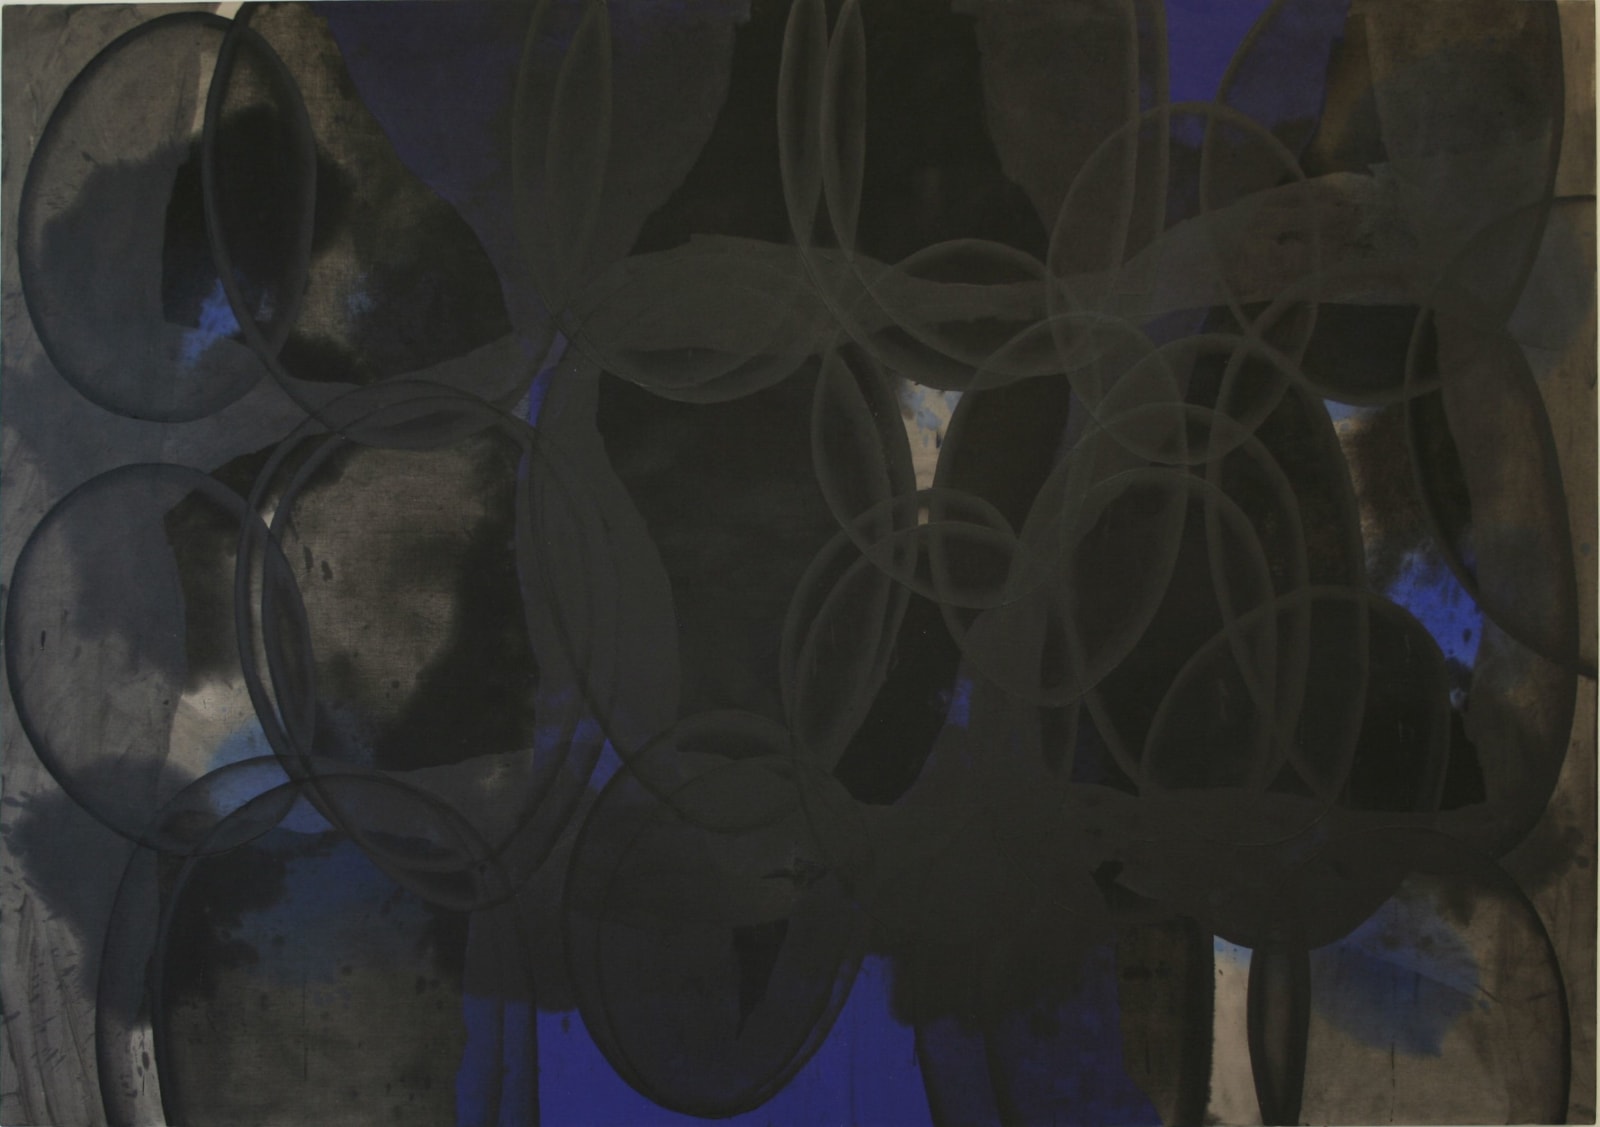 Ian McKeever, Assembly Painting (FQ), 2006-2007